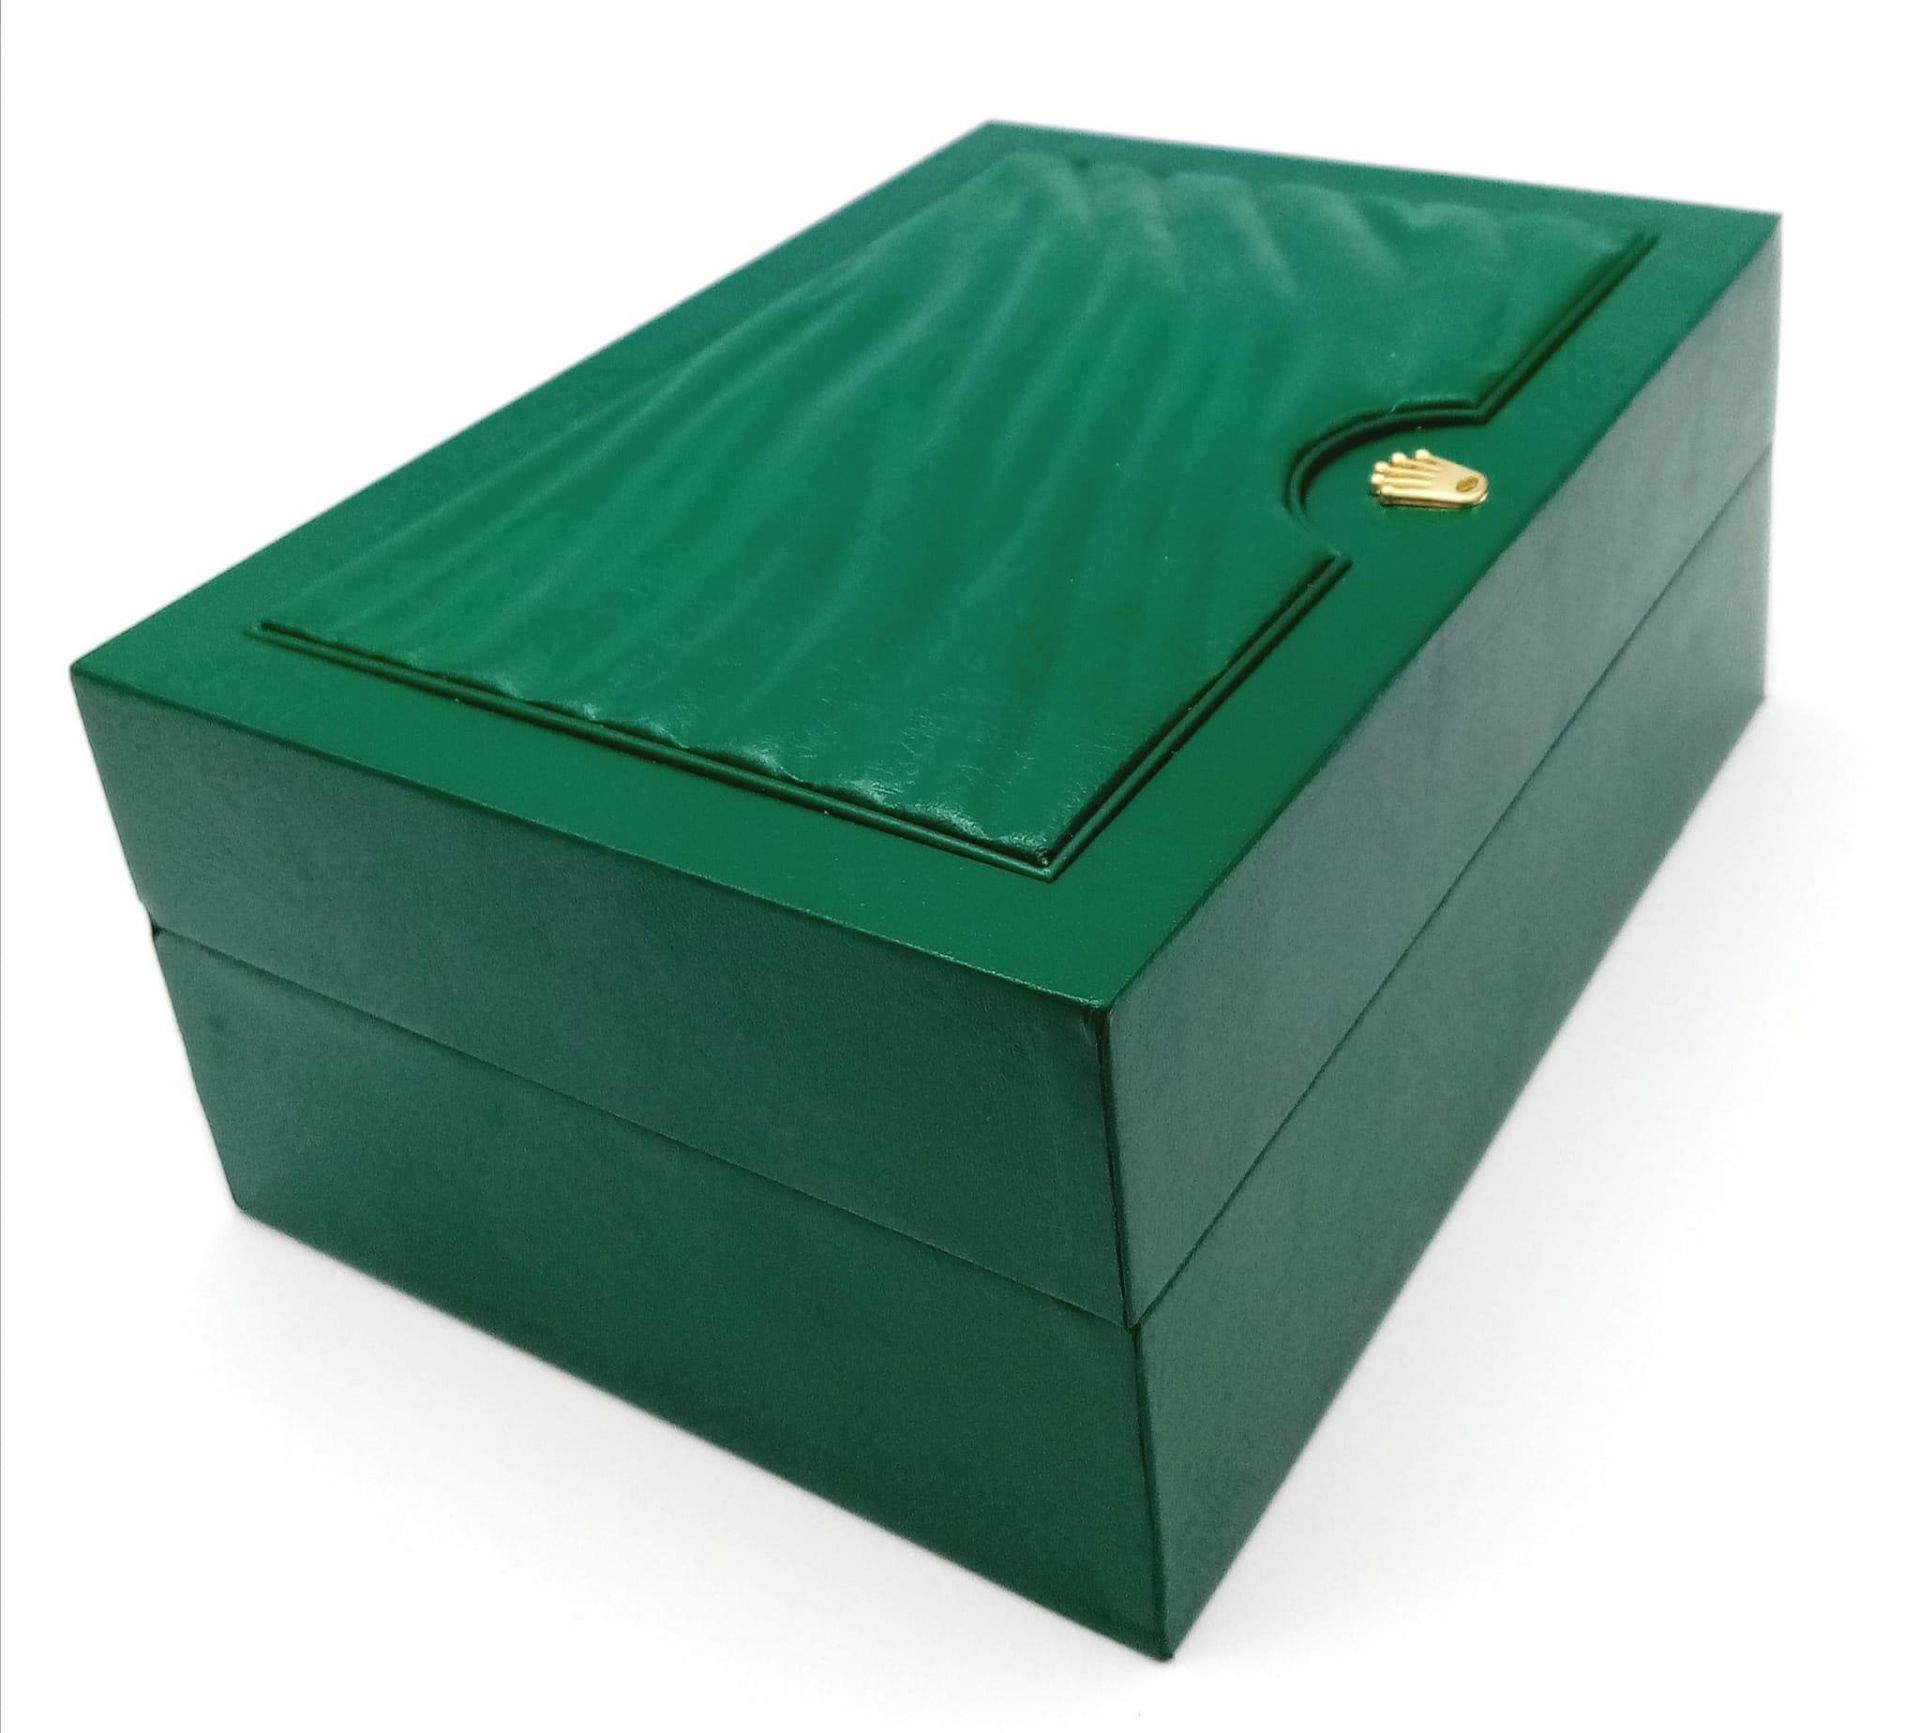 A Rolex Watch Case. Green ruffled exterior. Single watch space interior. 18cm x 13cm - Image 2 of 13